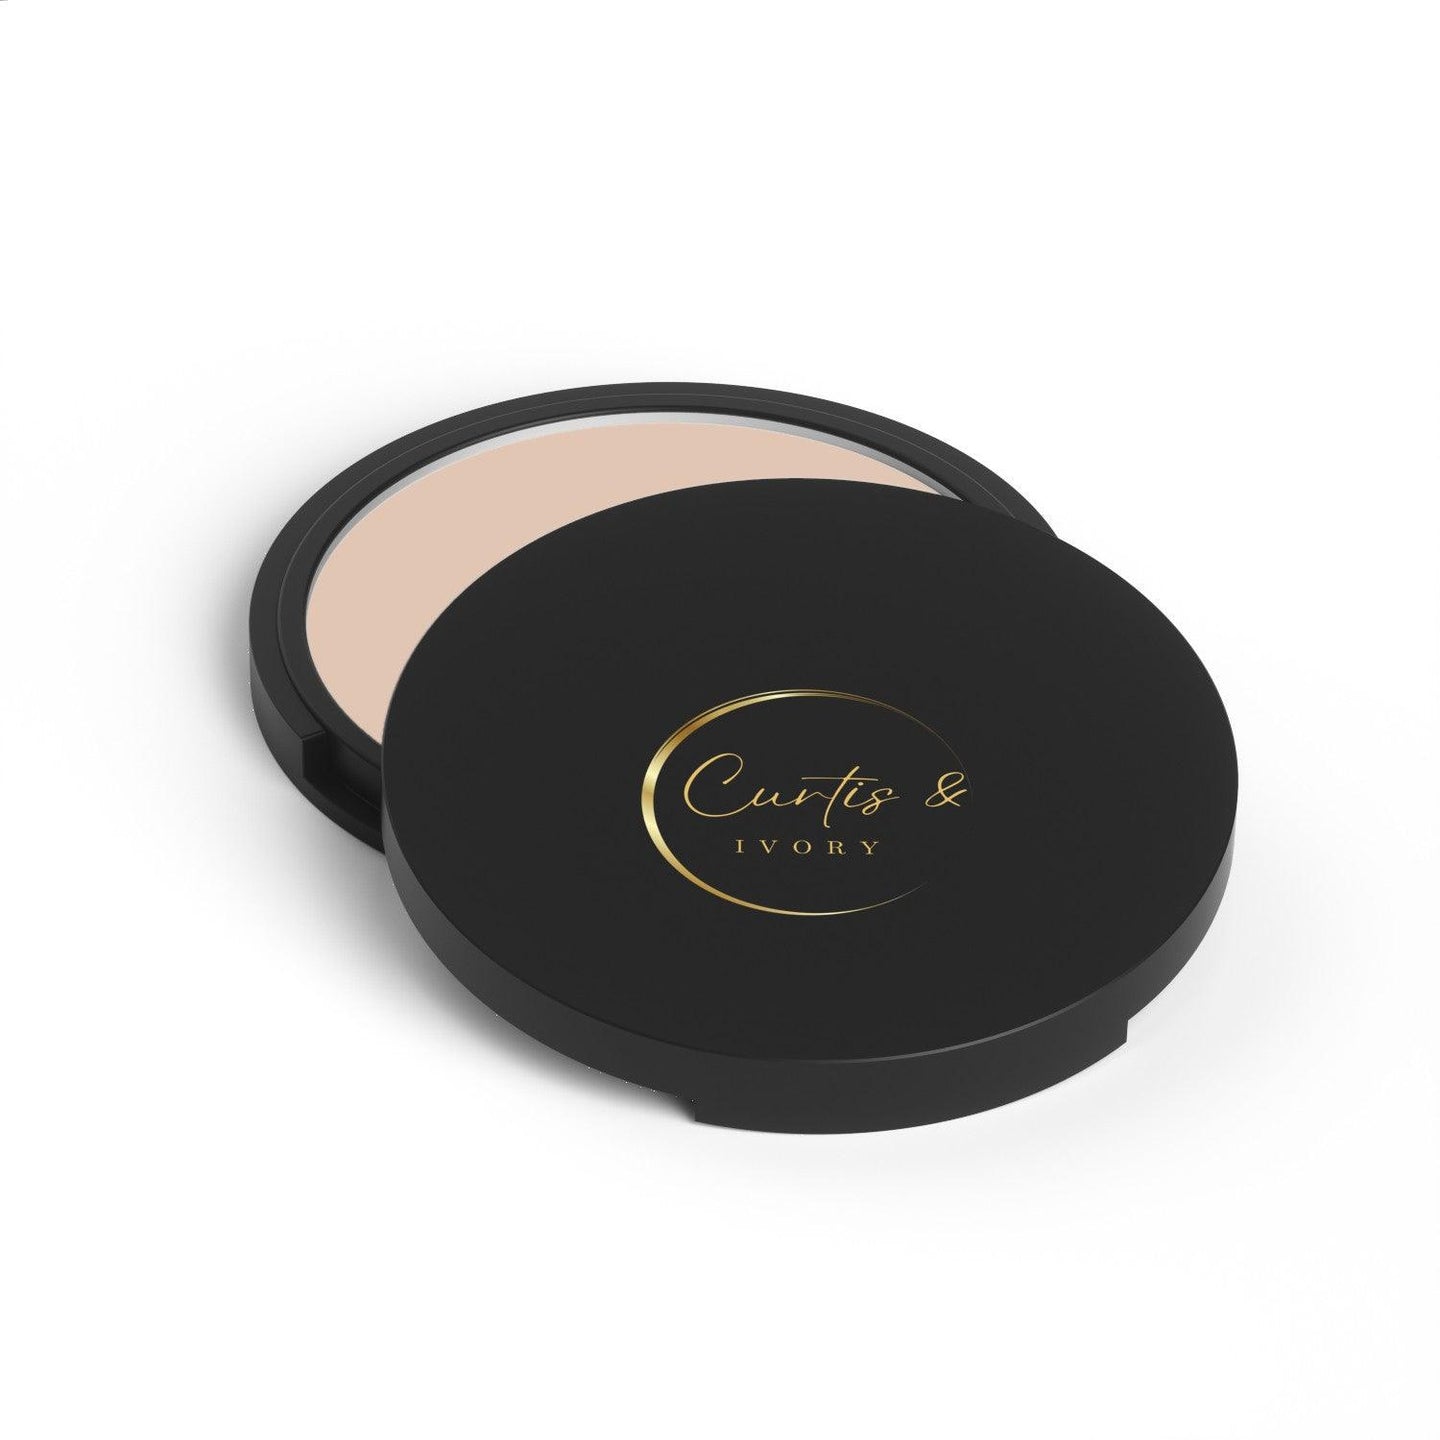 C & I Bronzer Creams. Can also be used as an eye shadow, transition or crease color for the eyes - Curtis & Ivory